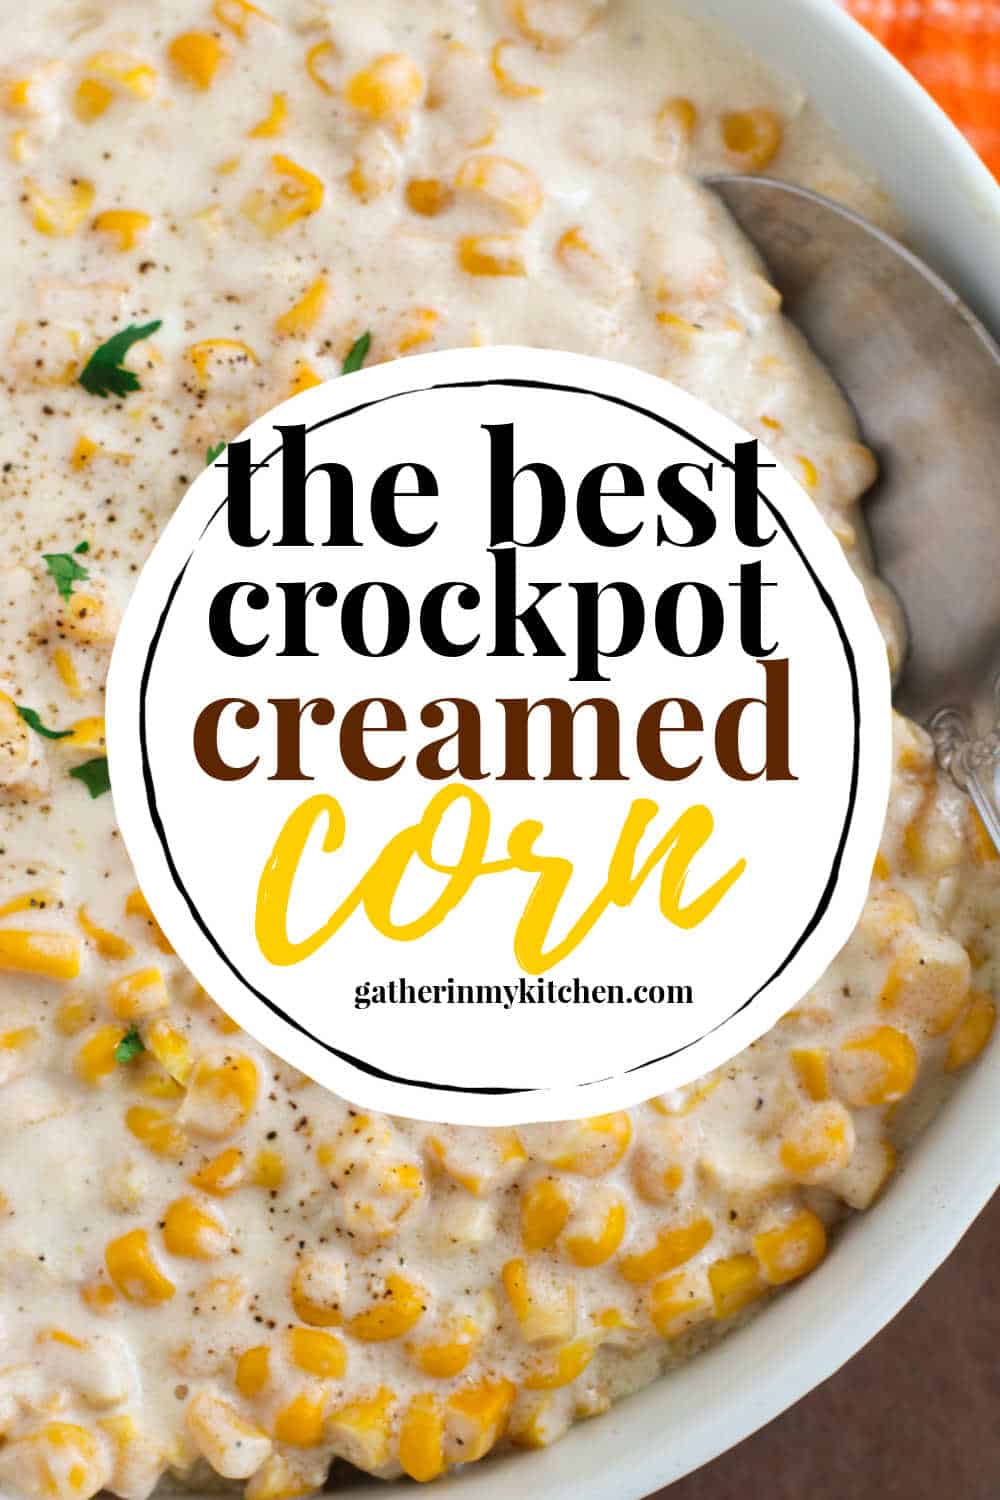 Pin image: closeup of bowl of creamed corn with a large circle overlay and the words "The best crockpot creamed corn".